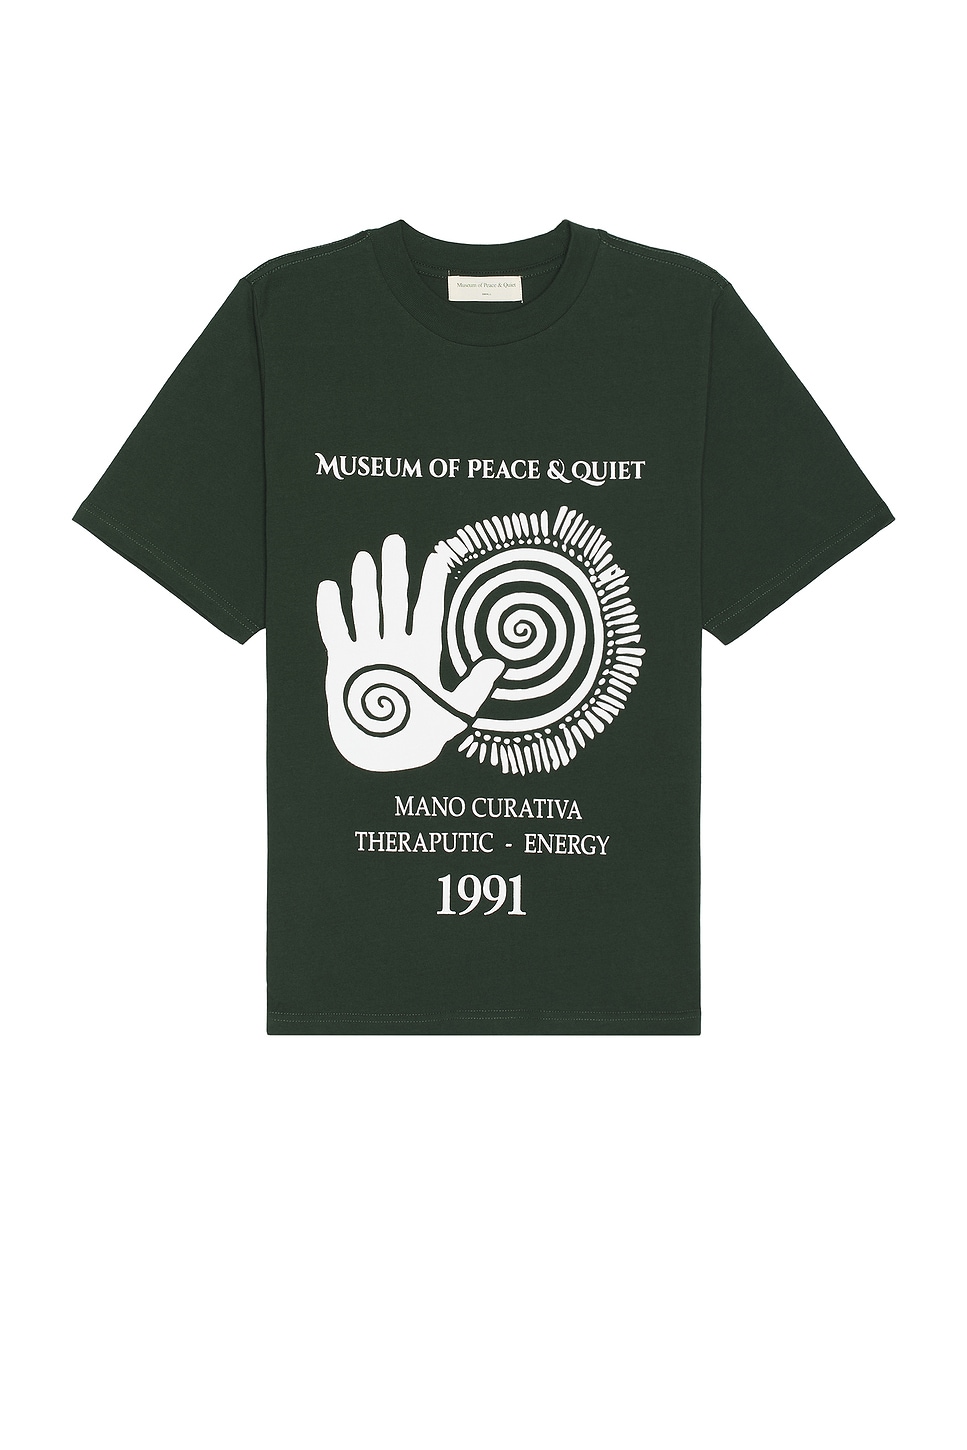 Image 1 of Museum of Peace and Quiet Mano Curativa T-Shirt in Forest